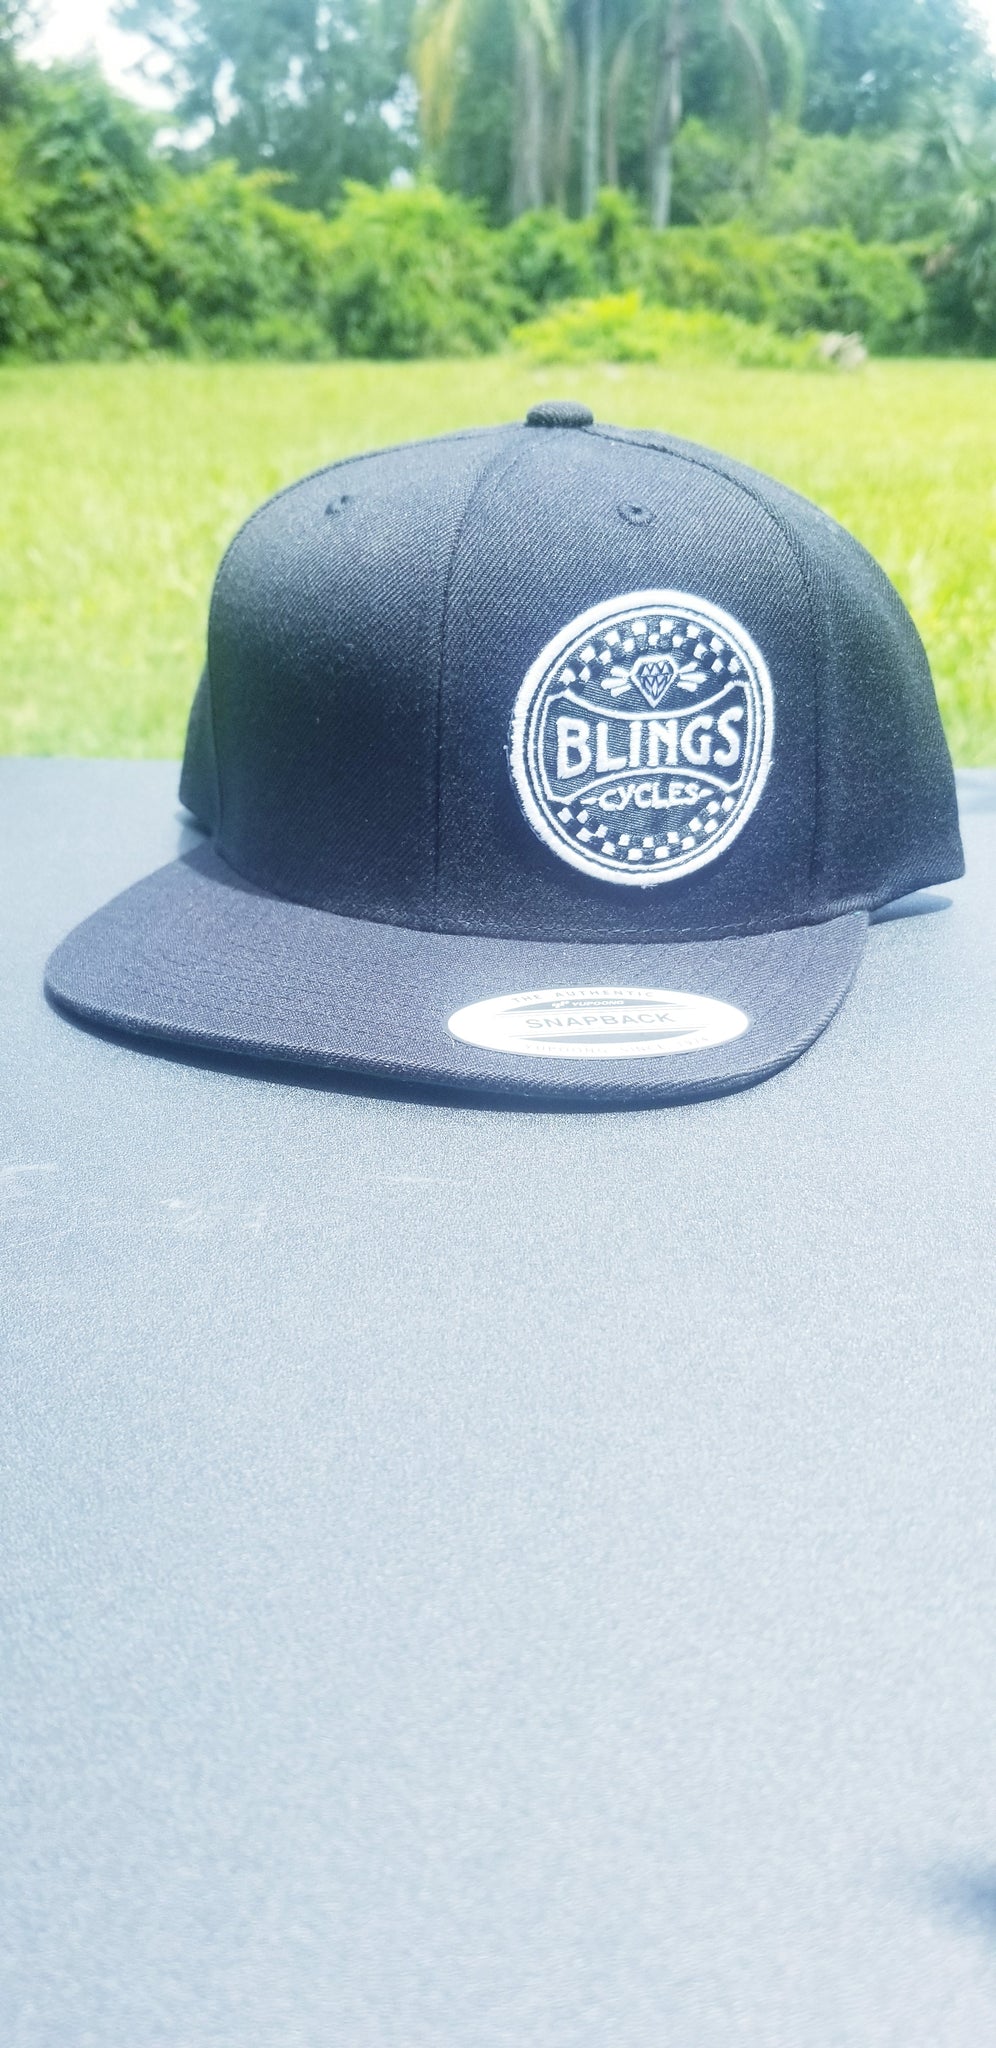 BLINGS CYCLES HATS